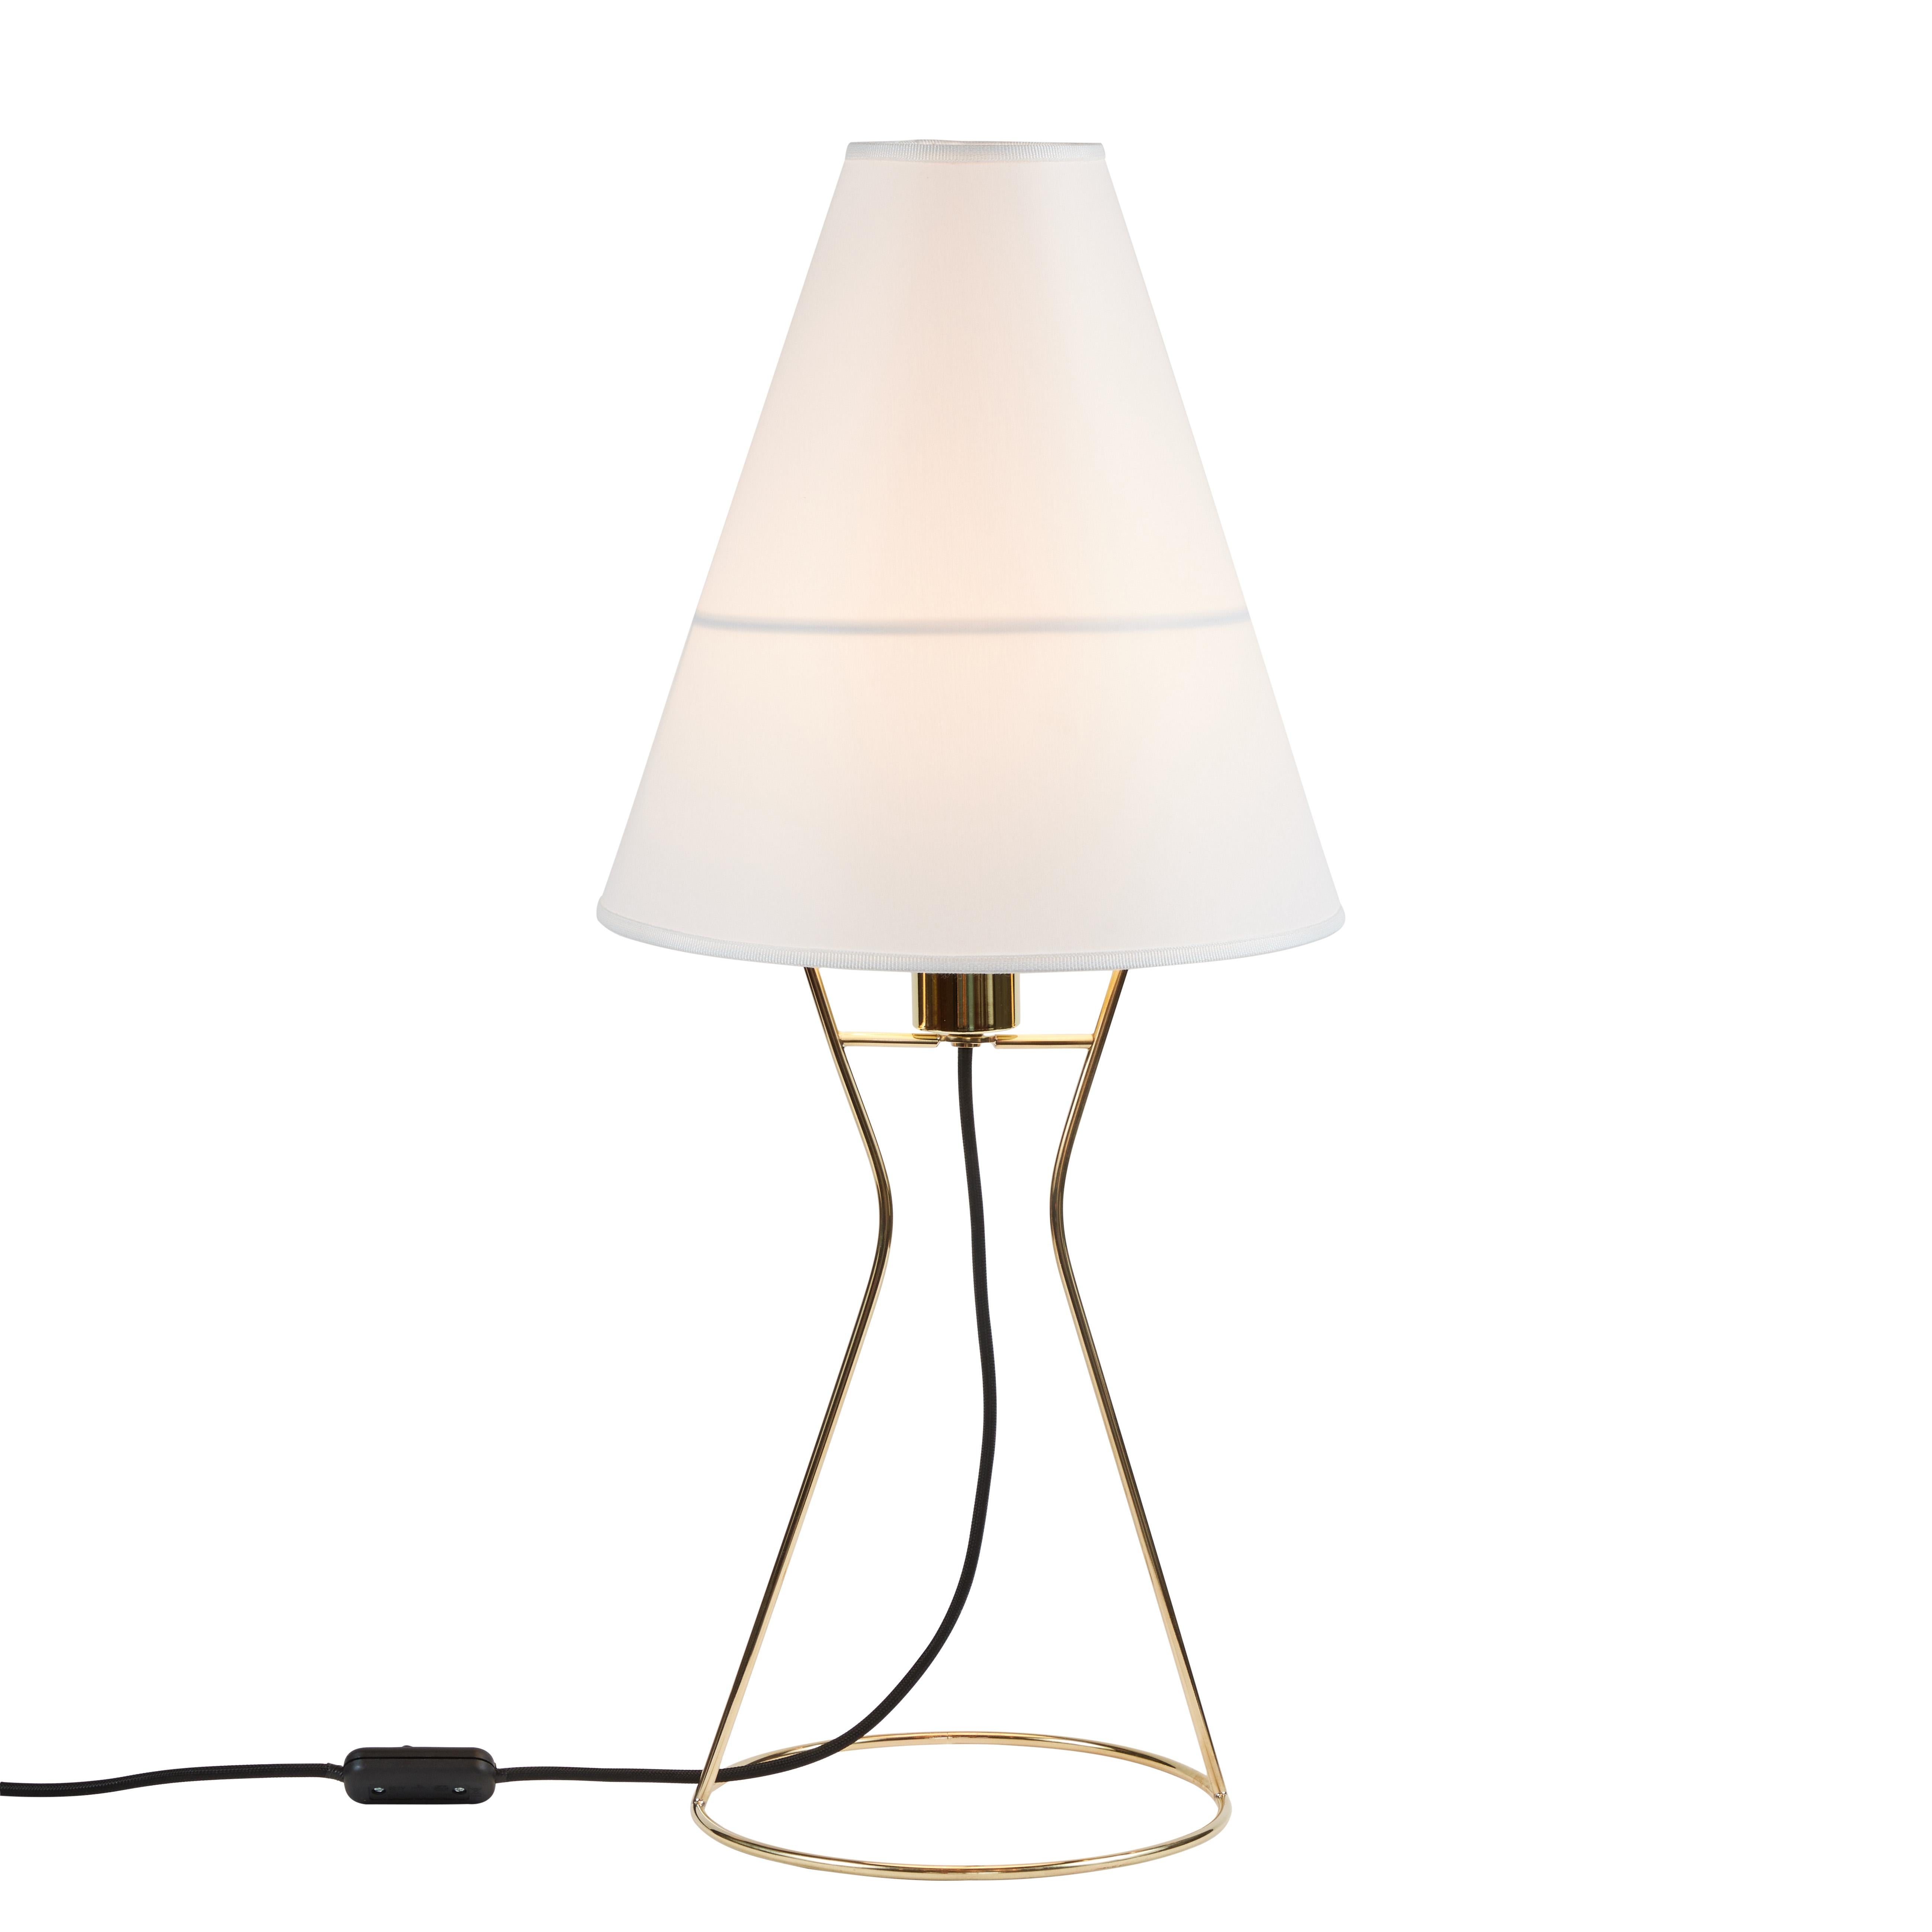 Carl Auböck Vice Versa Table Lamp In New Condition For Sale In Glendale, CA